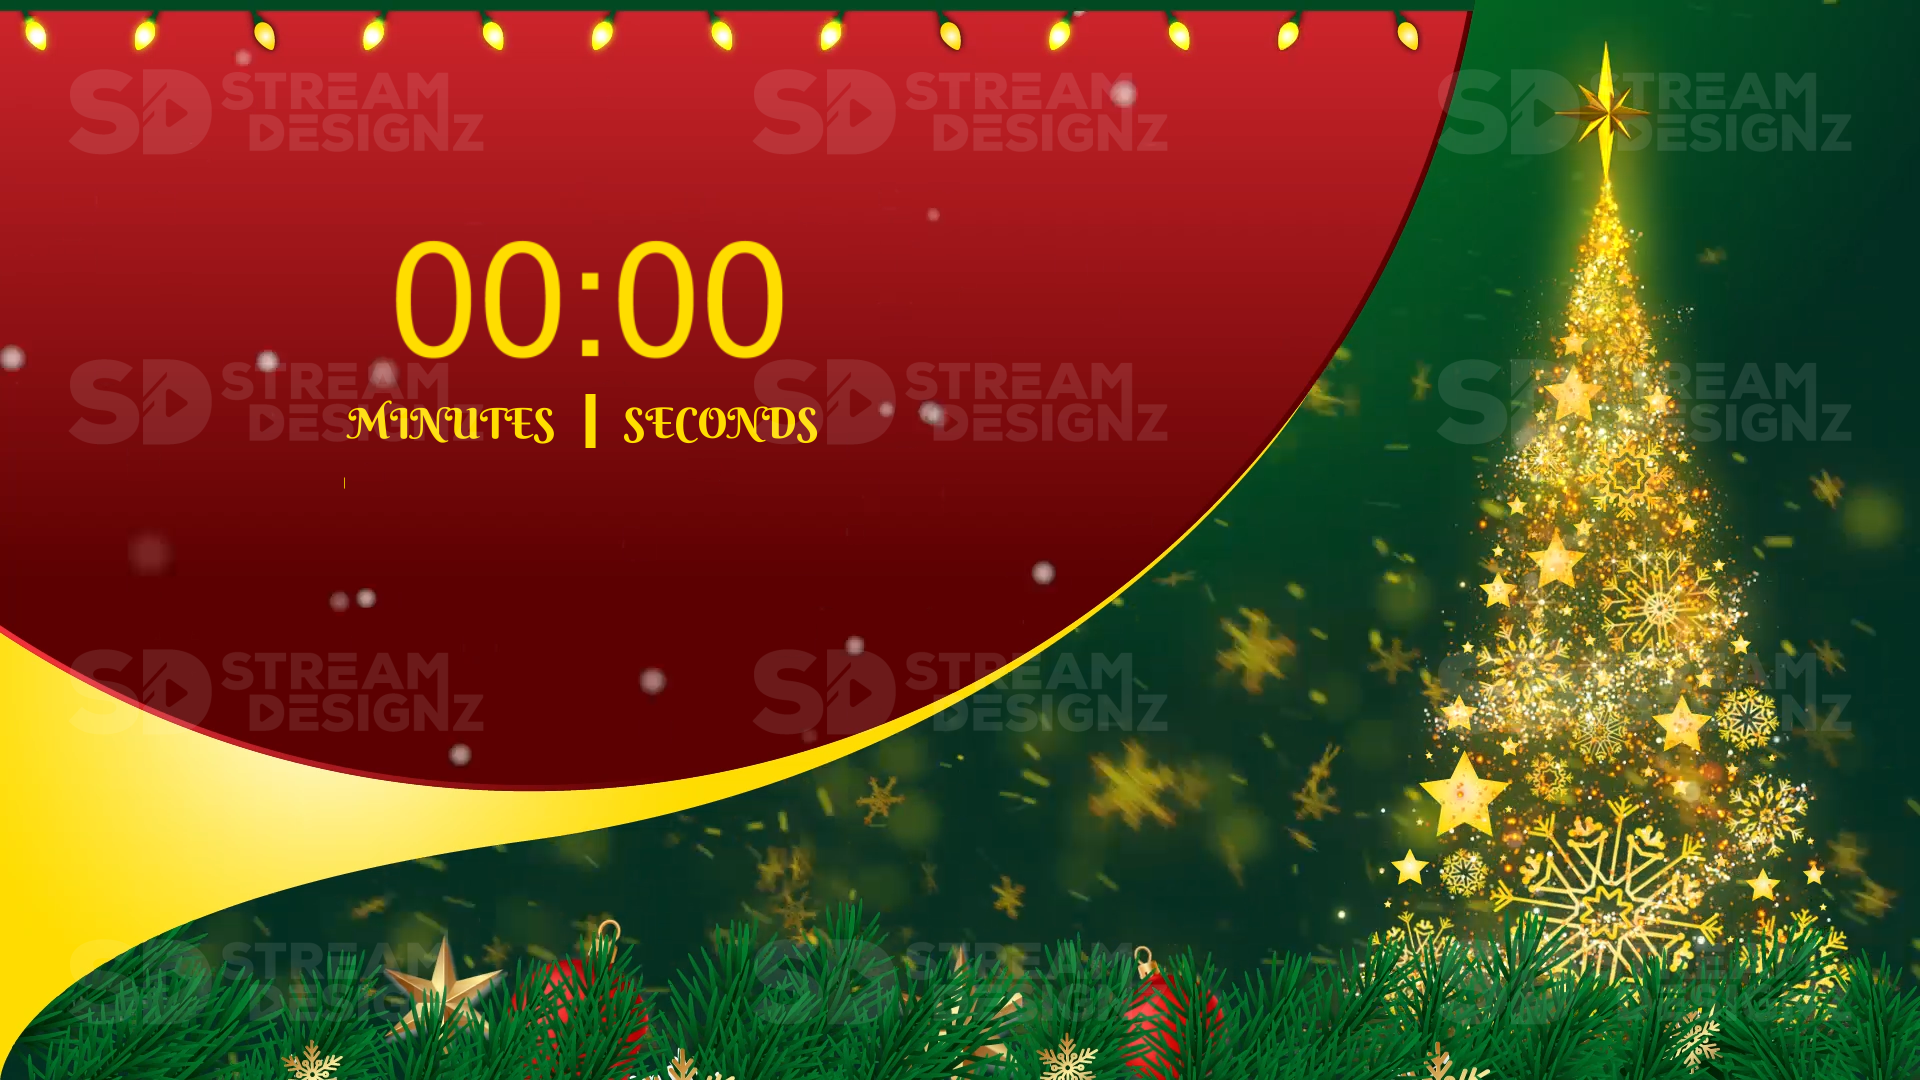 5 minute count up timer merry christmas thumbnail stream designz